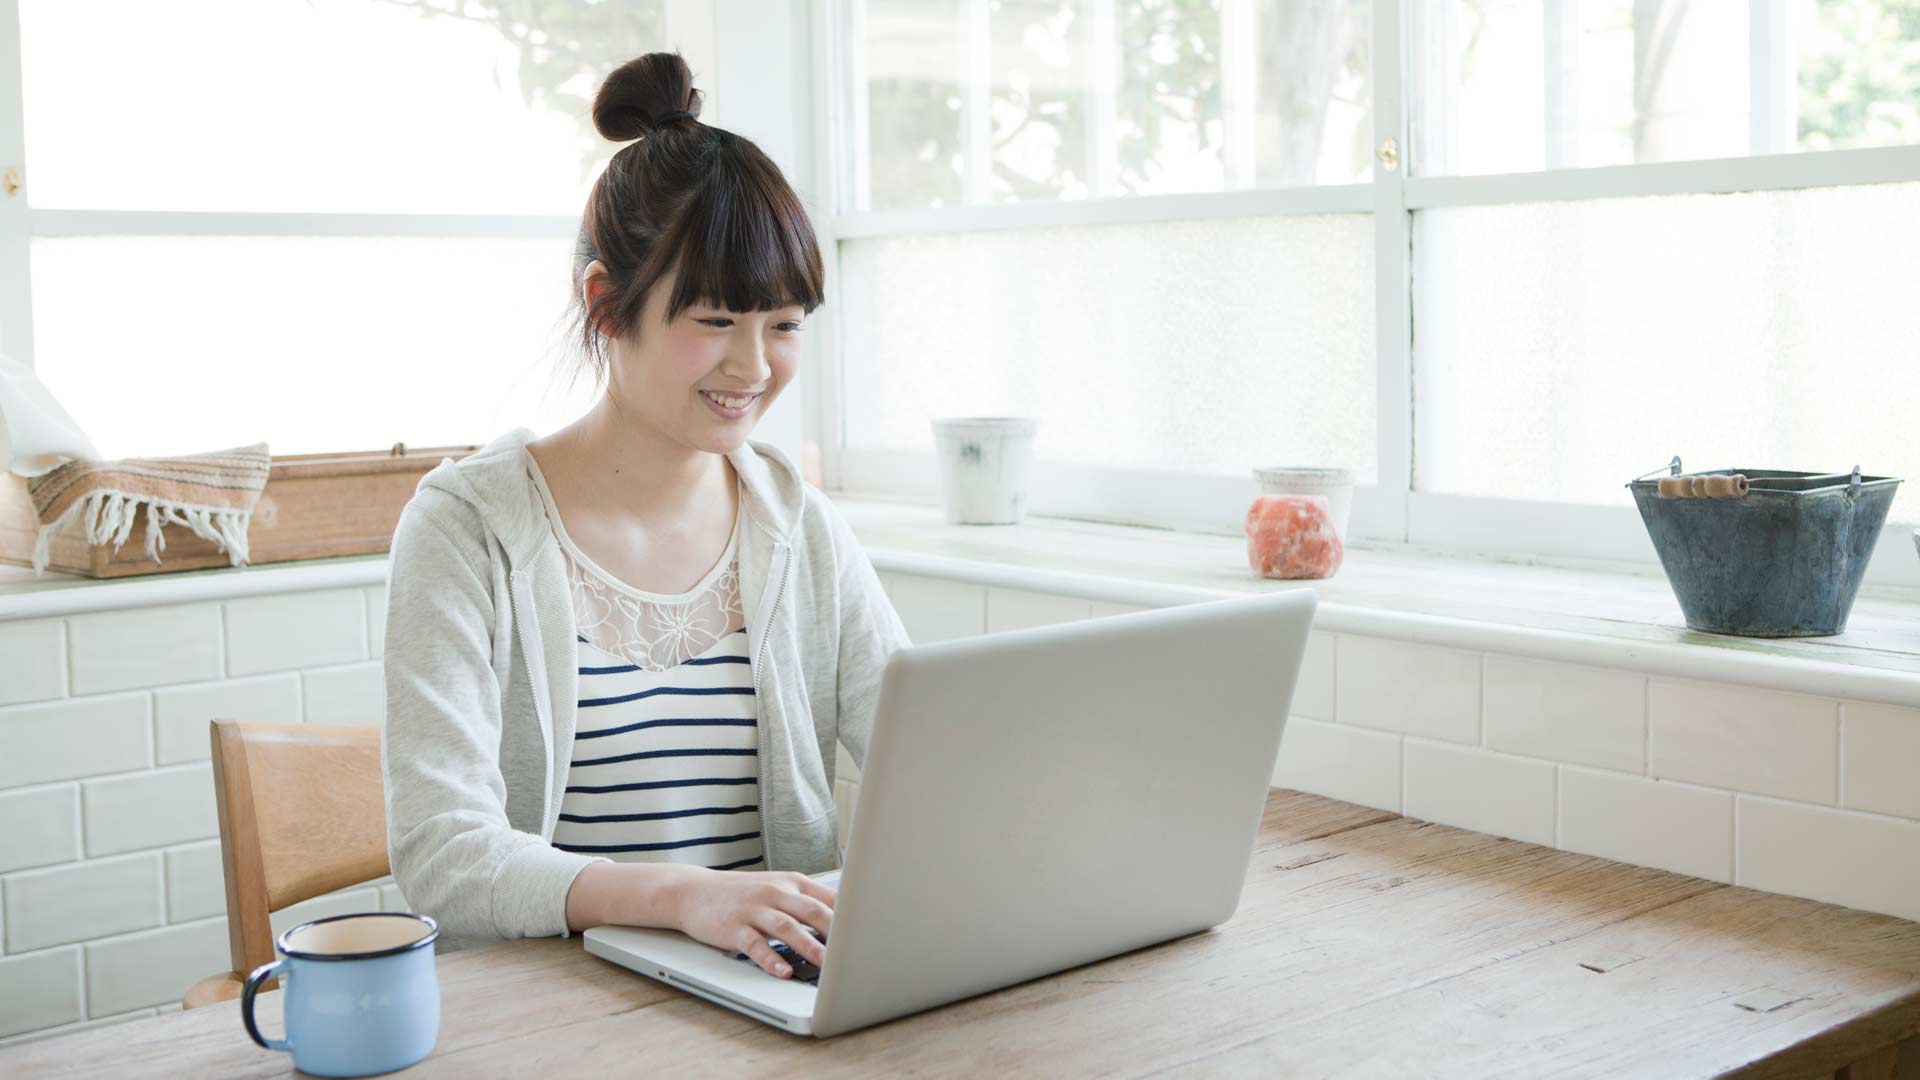 Young Asian woman on her laptop wearing a gray cardigan over a striped shirt.